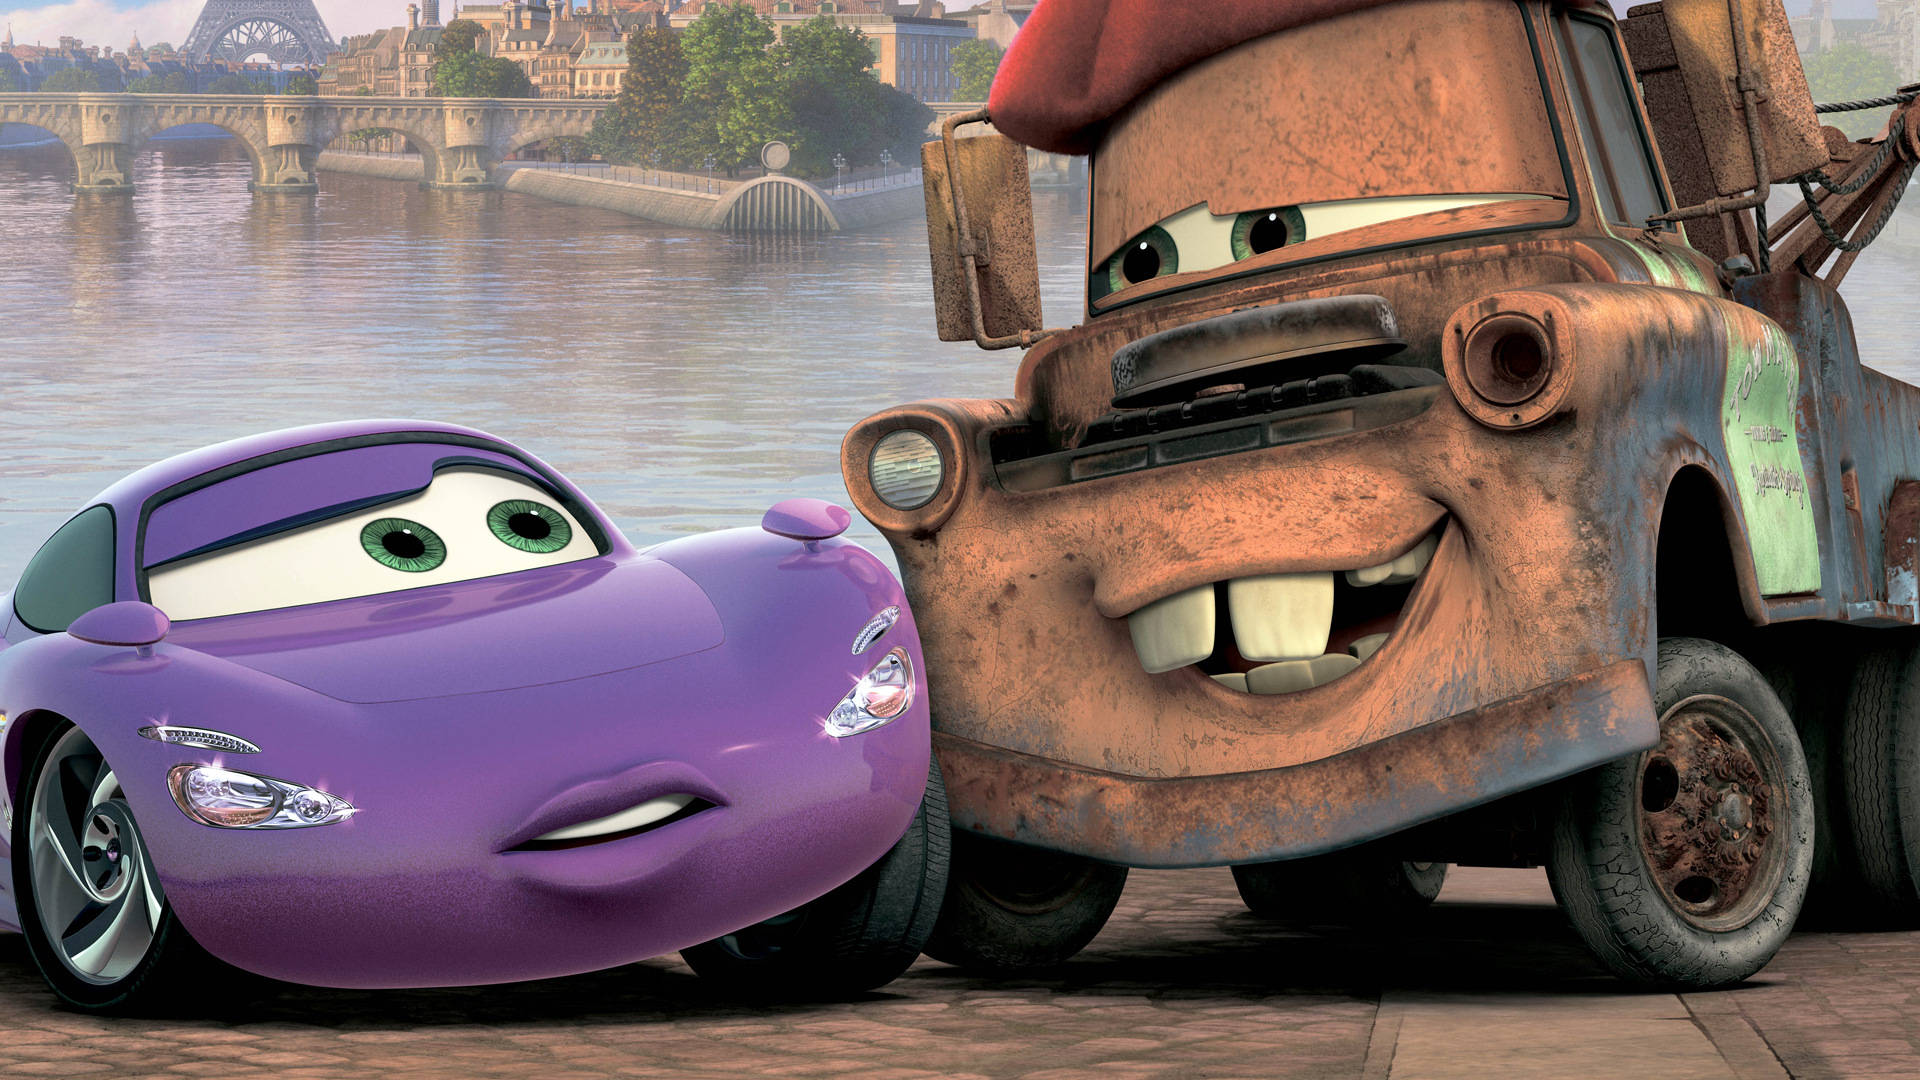 Holley And Mater Cars 2 Background